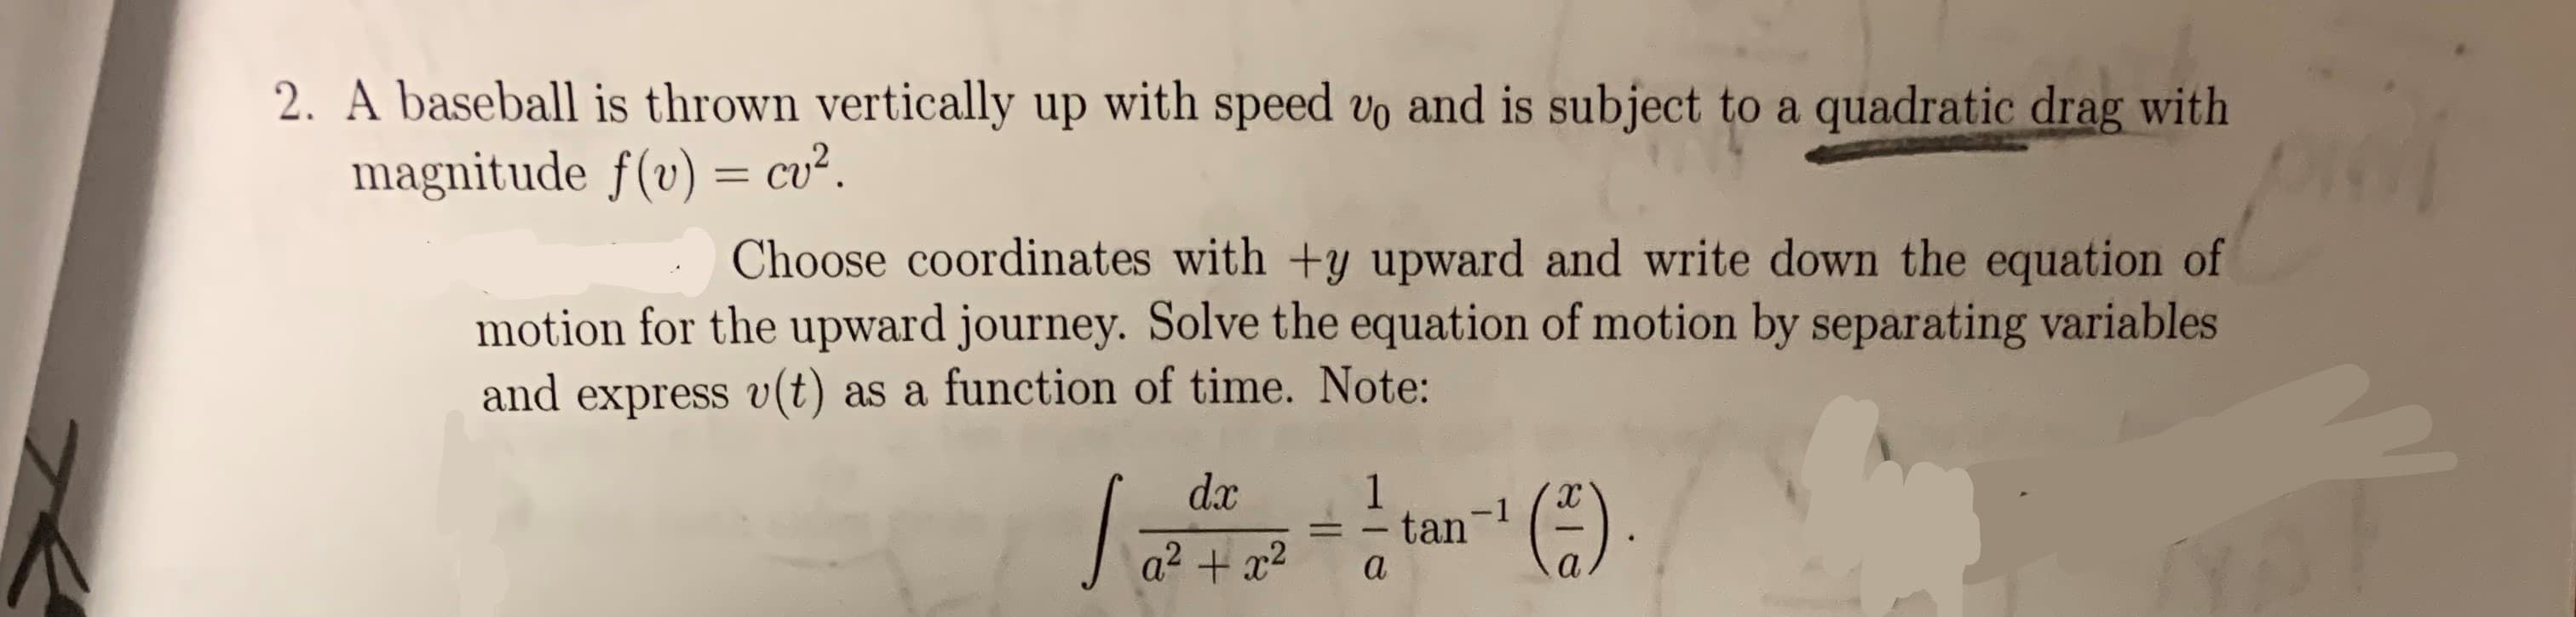 2. A baseball is thrown vertically up with speed vo and is subject to a quadratic drag with
magnitude f(v) = cu2.
Choose coordinates with +y upward and write down the equation of
motion for the upward journey. Solve the equation of motion by separating variables
and express v(t)
as a function of time. Note:
dx
S:
1
tan
-1
a
a
